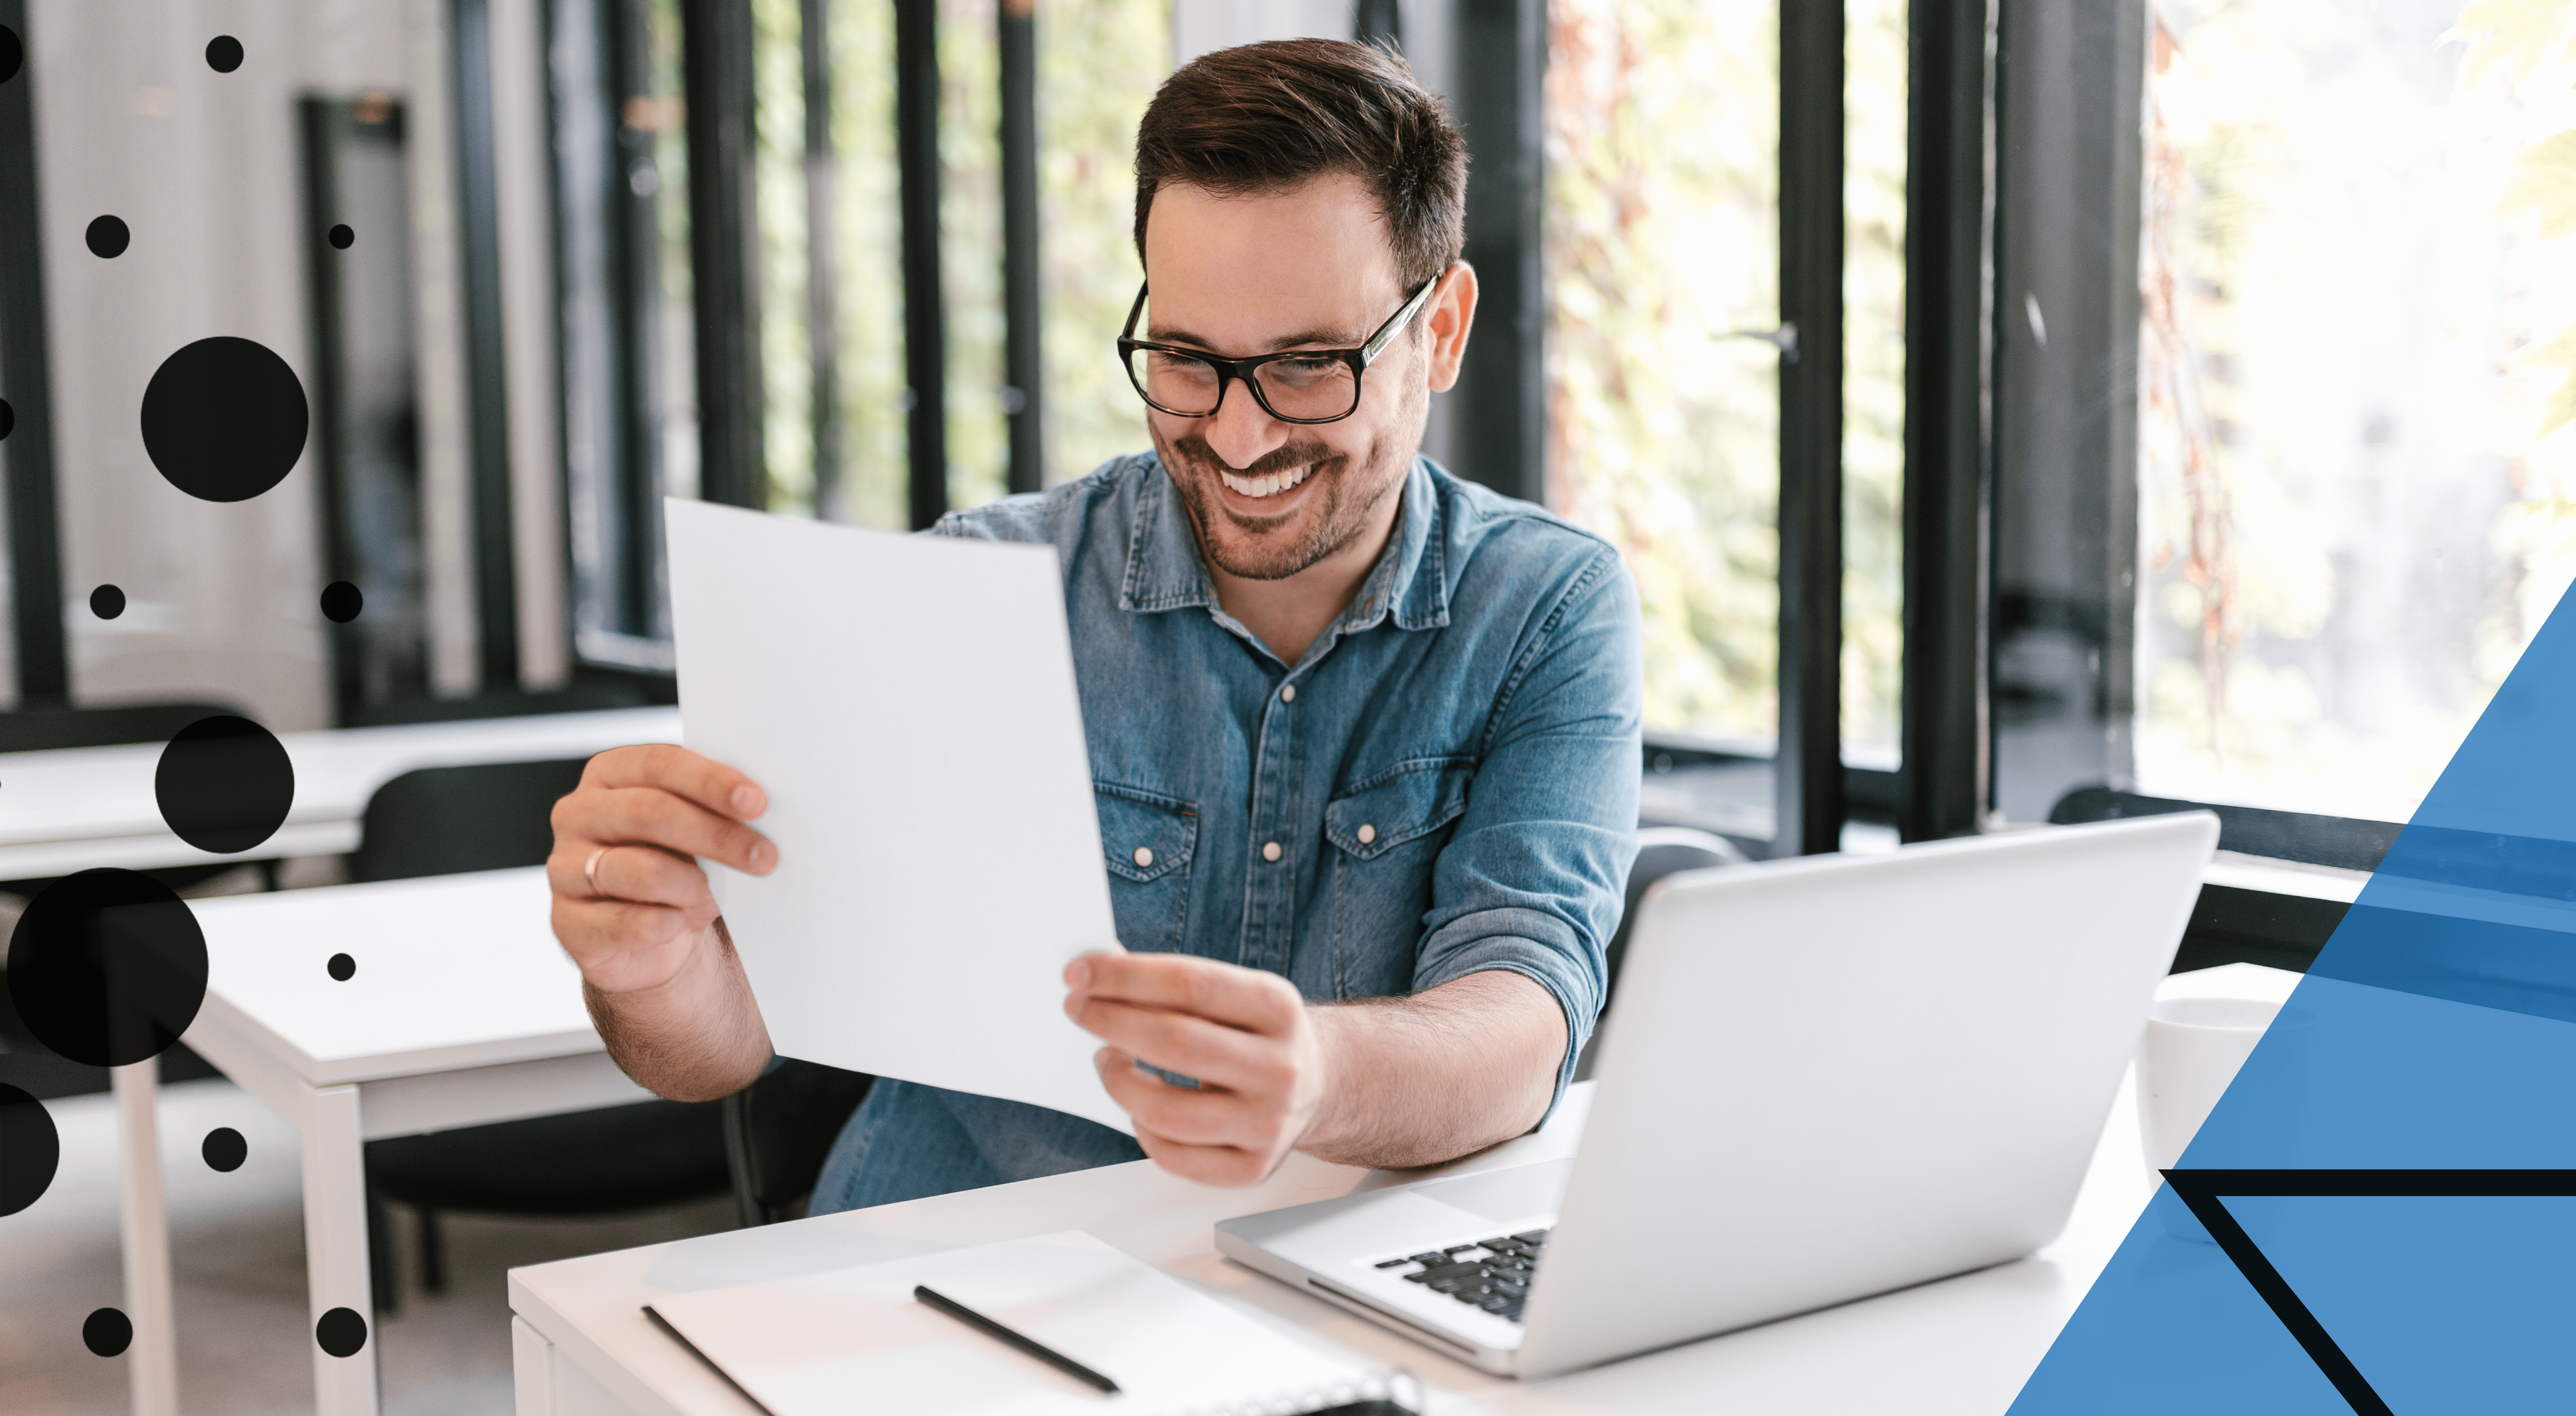 Man at desk on laptop looking pleased as he looks at his results on paper